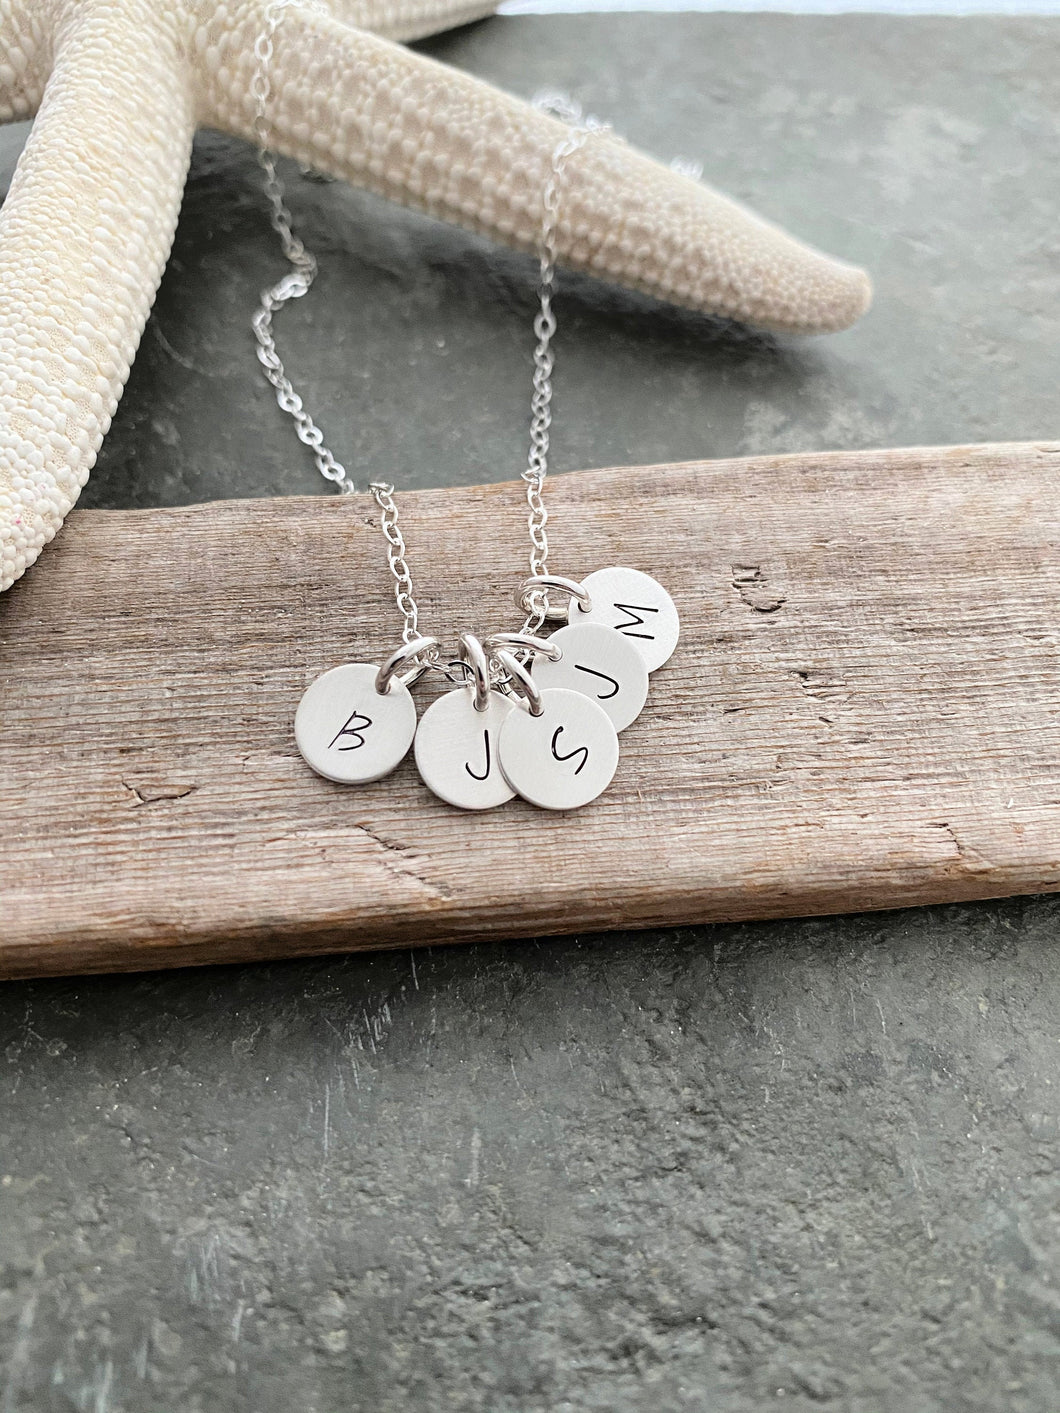 Mini Initial Jewelry, Sterling Silver Personalized Initial Necklace - sterling discs Simple Monogram Tiny silver customized gift for her